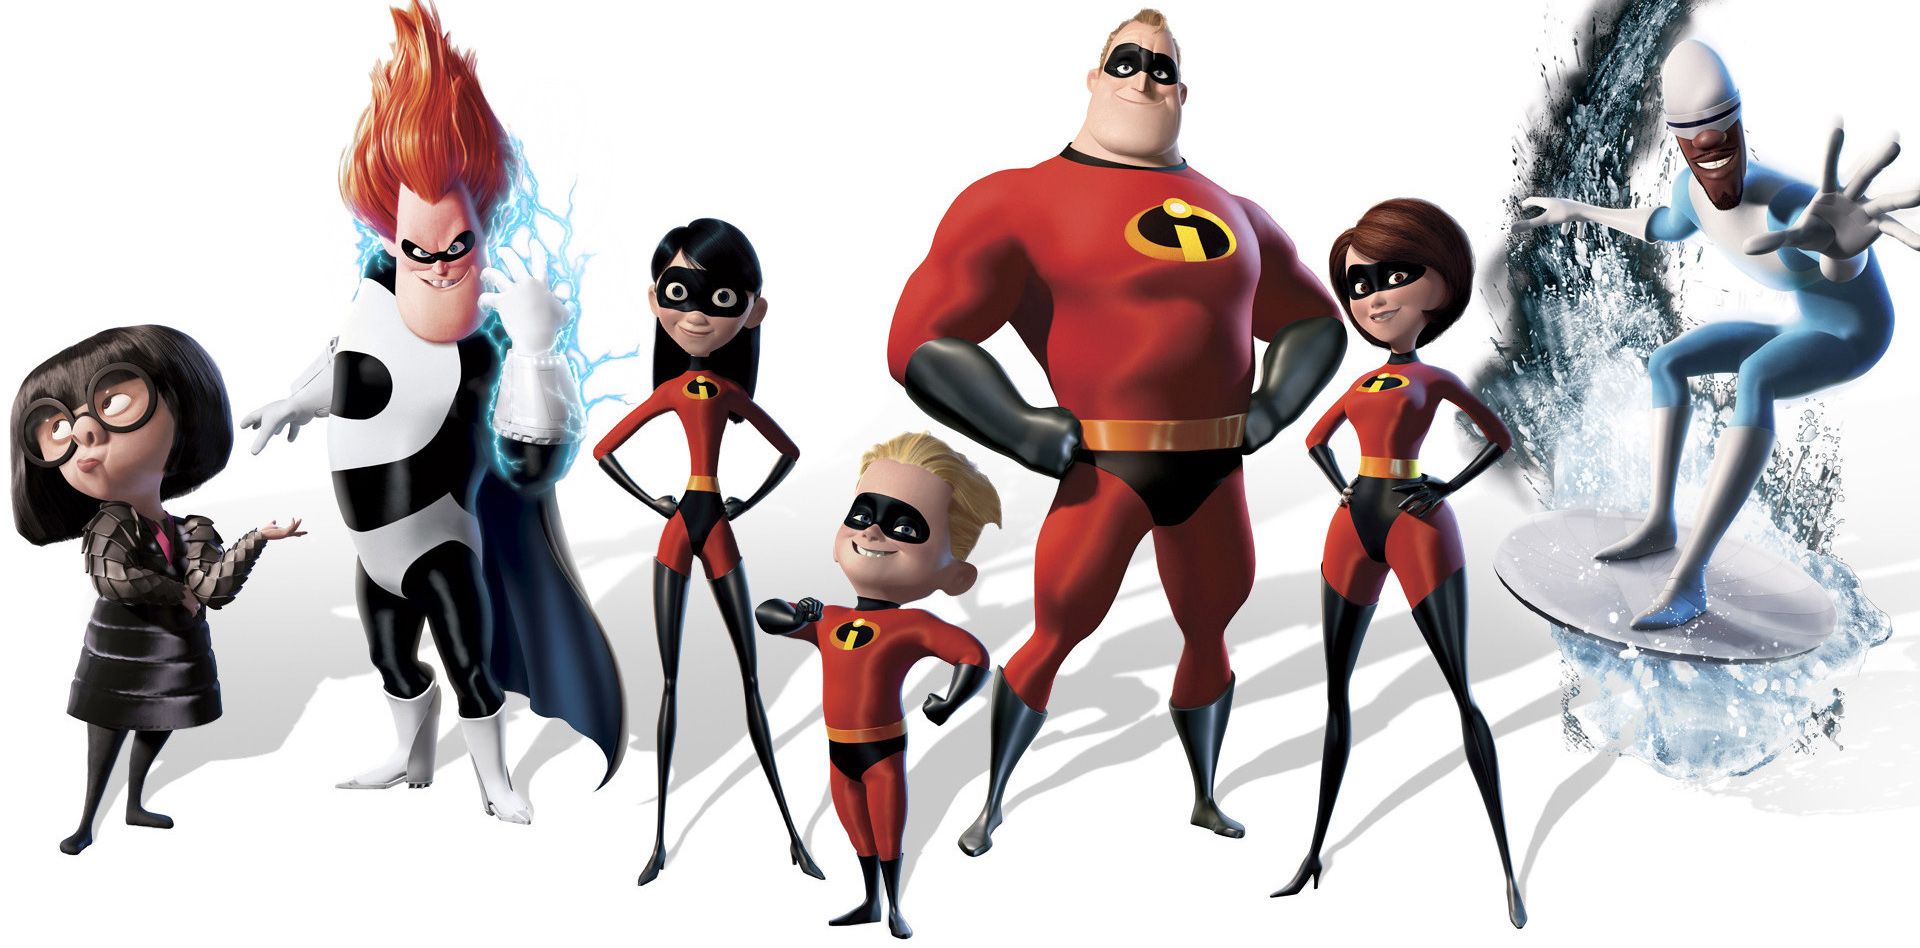 1920x948px Incredibles (540.9 KB).06.2015